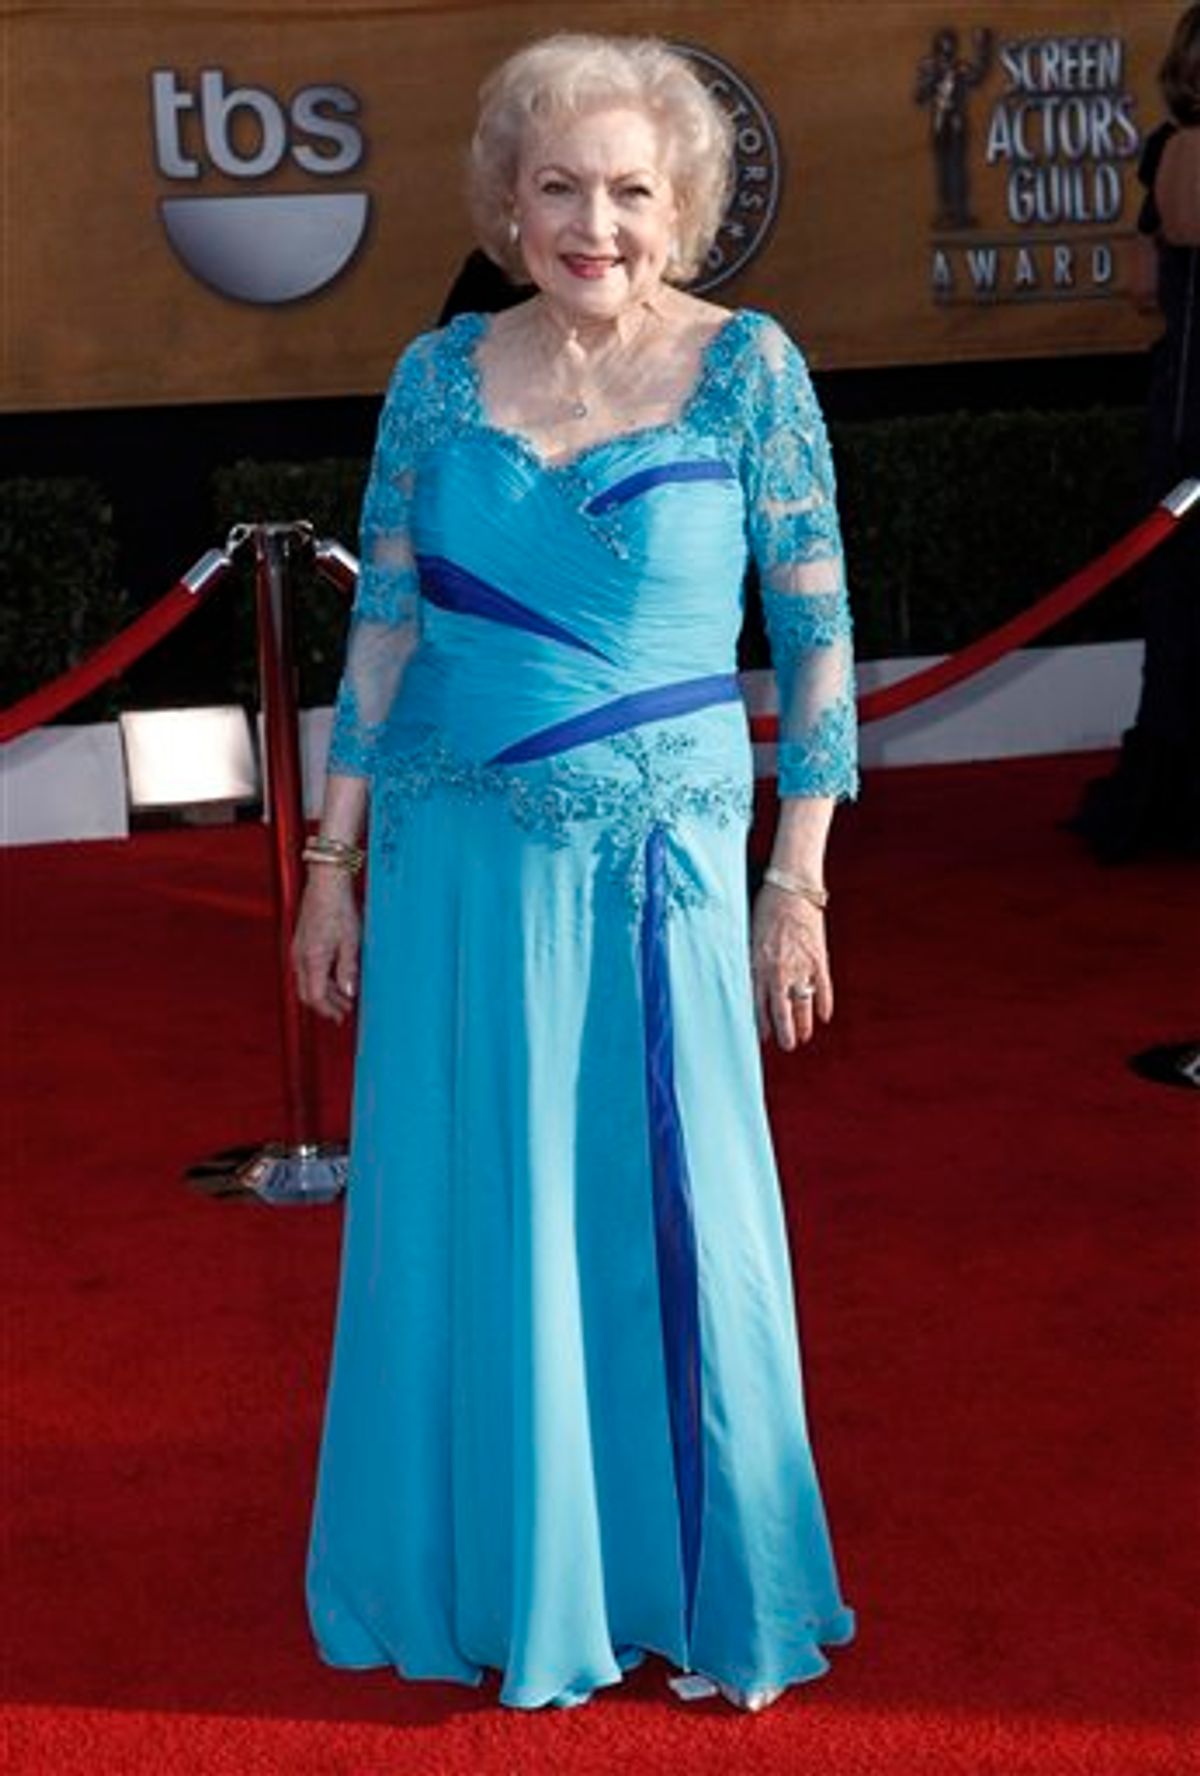 Betty White arrives at the 16th Annual Screen Actors Guild Awards on Saturday, Jan. 23, 2010, in Los Angeles.  (AP Photo/Matt Sayles) (AP)